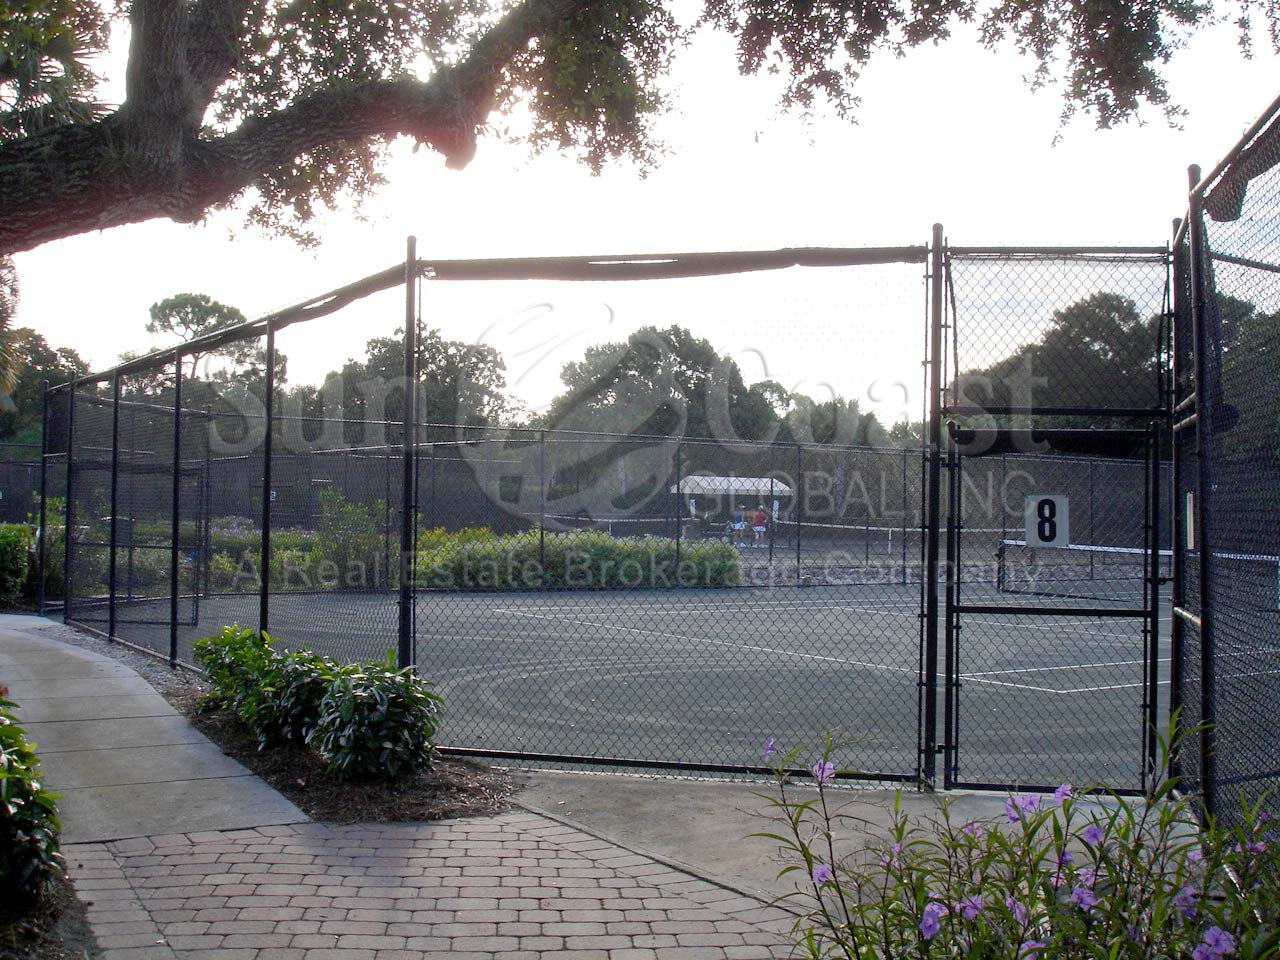 PELICAN BAY Commons tennis courts